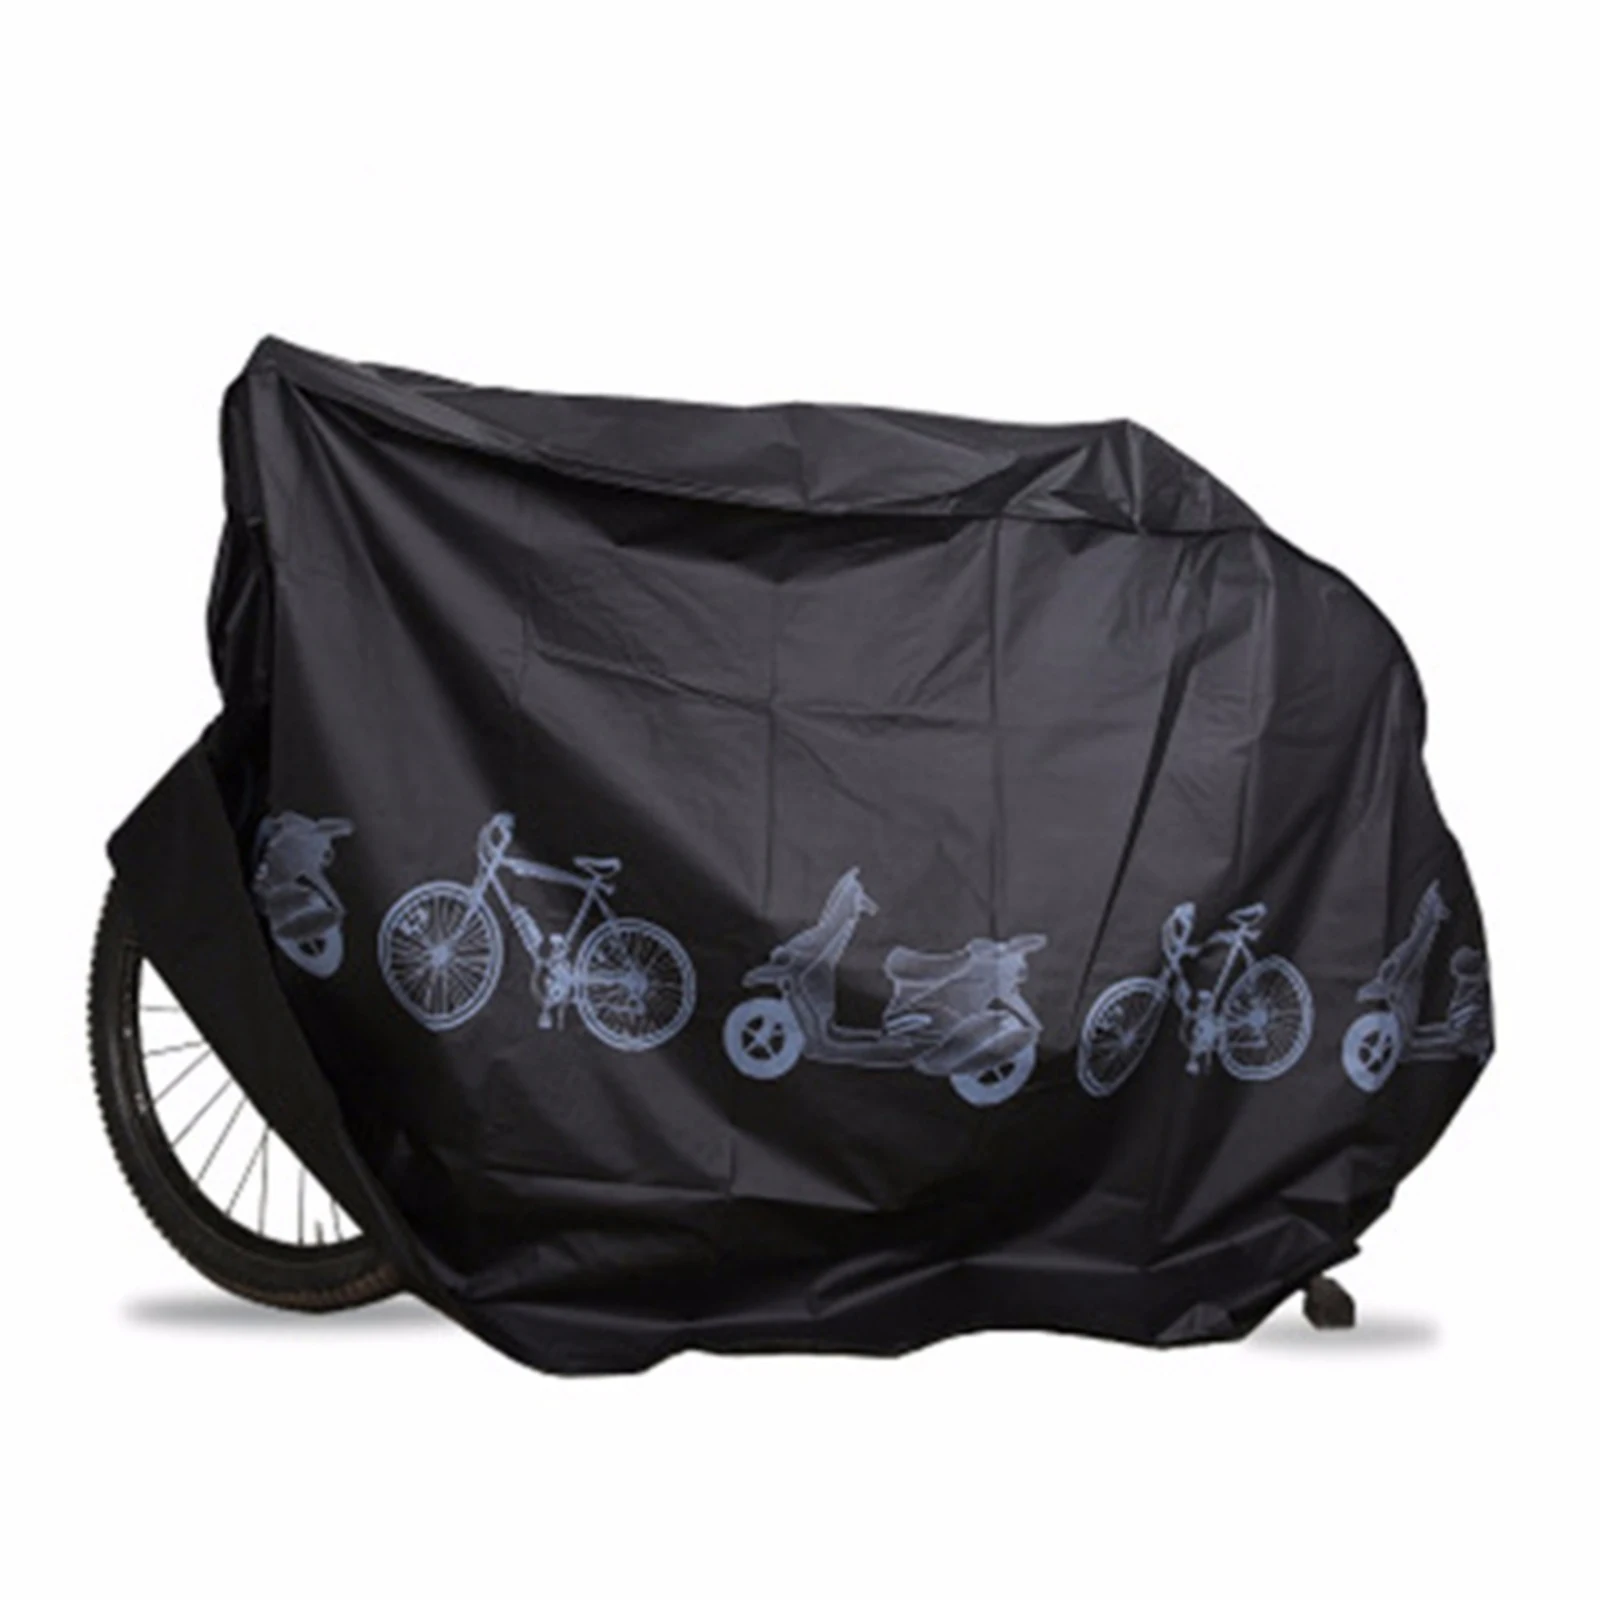 Large Waterproof Bike Bicycle Cover Outdoor UV Guardian MTB Bike Case 200x110 Dust Cover Light Portable Polyester Accessories